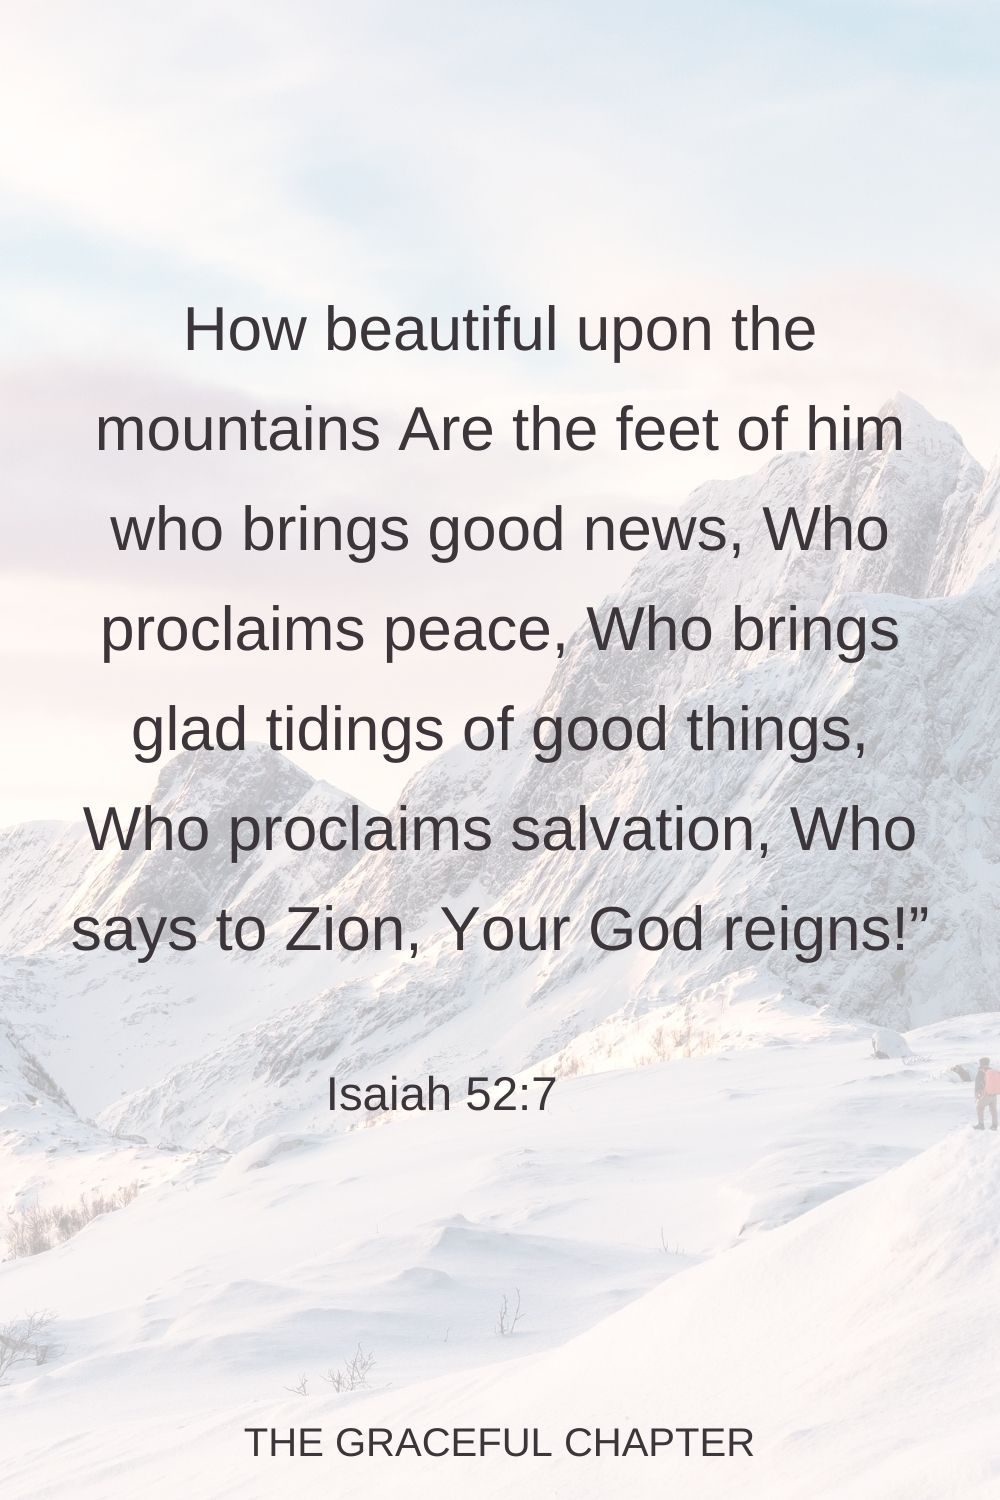 How beautiful upon the mountains Are the feet of him who brings good news, Who proclaims peace, Who brings glad tidings of good things, Who proclaims salvation, Who says to Zion, Your God reigns!” Isaiah 52:7